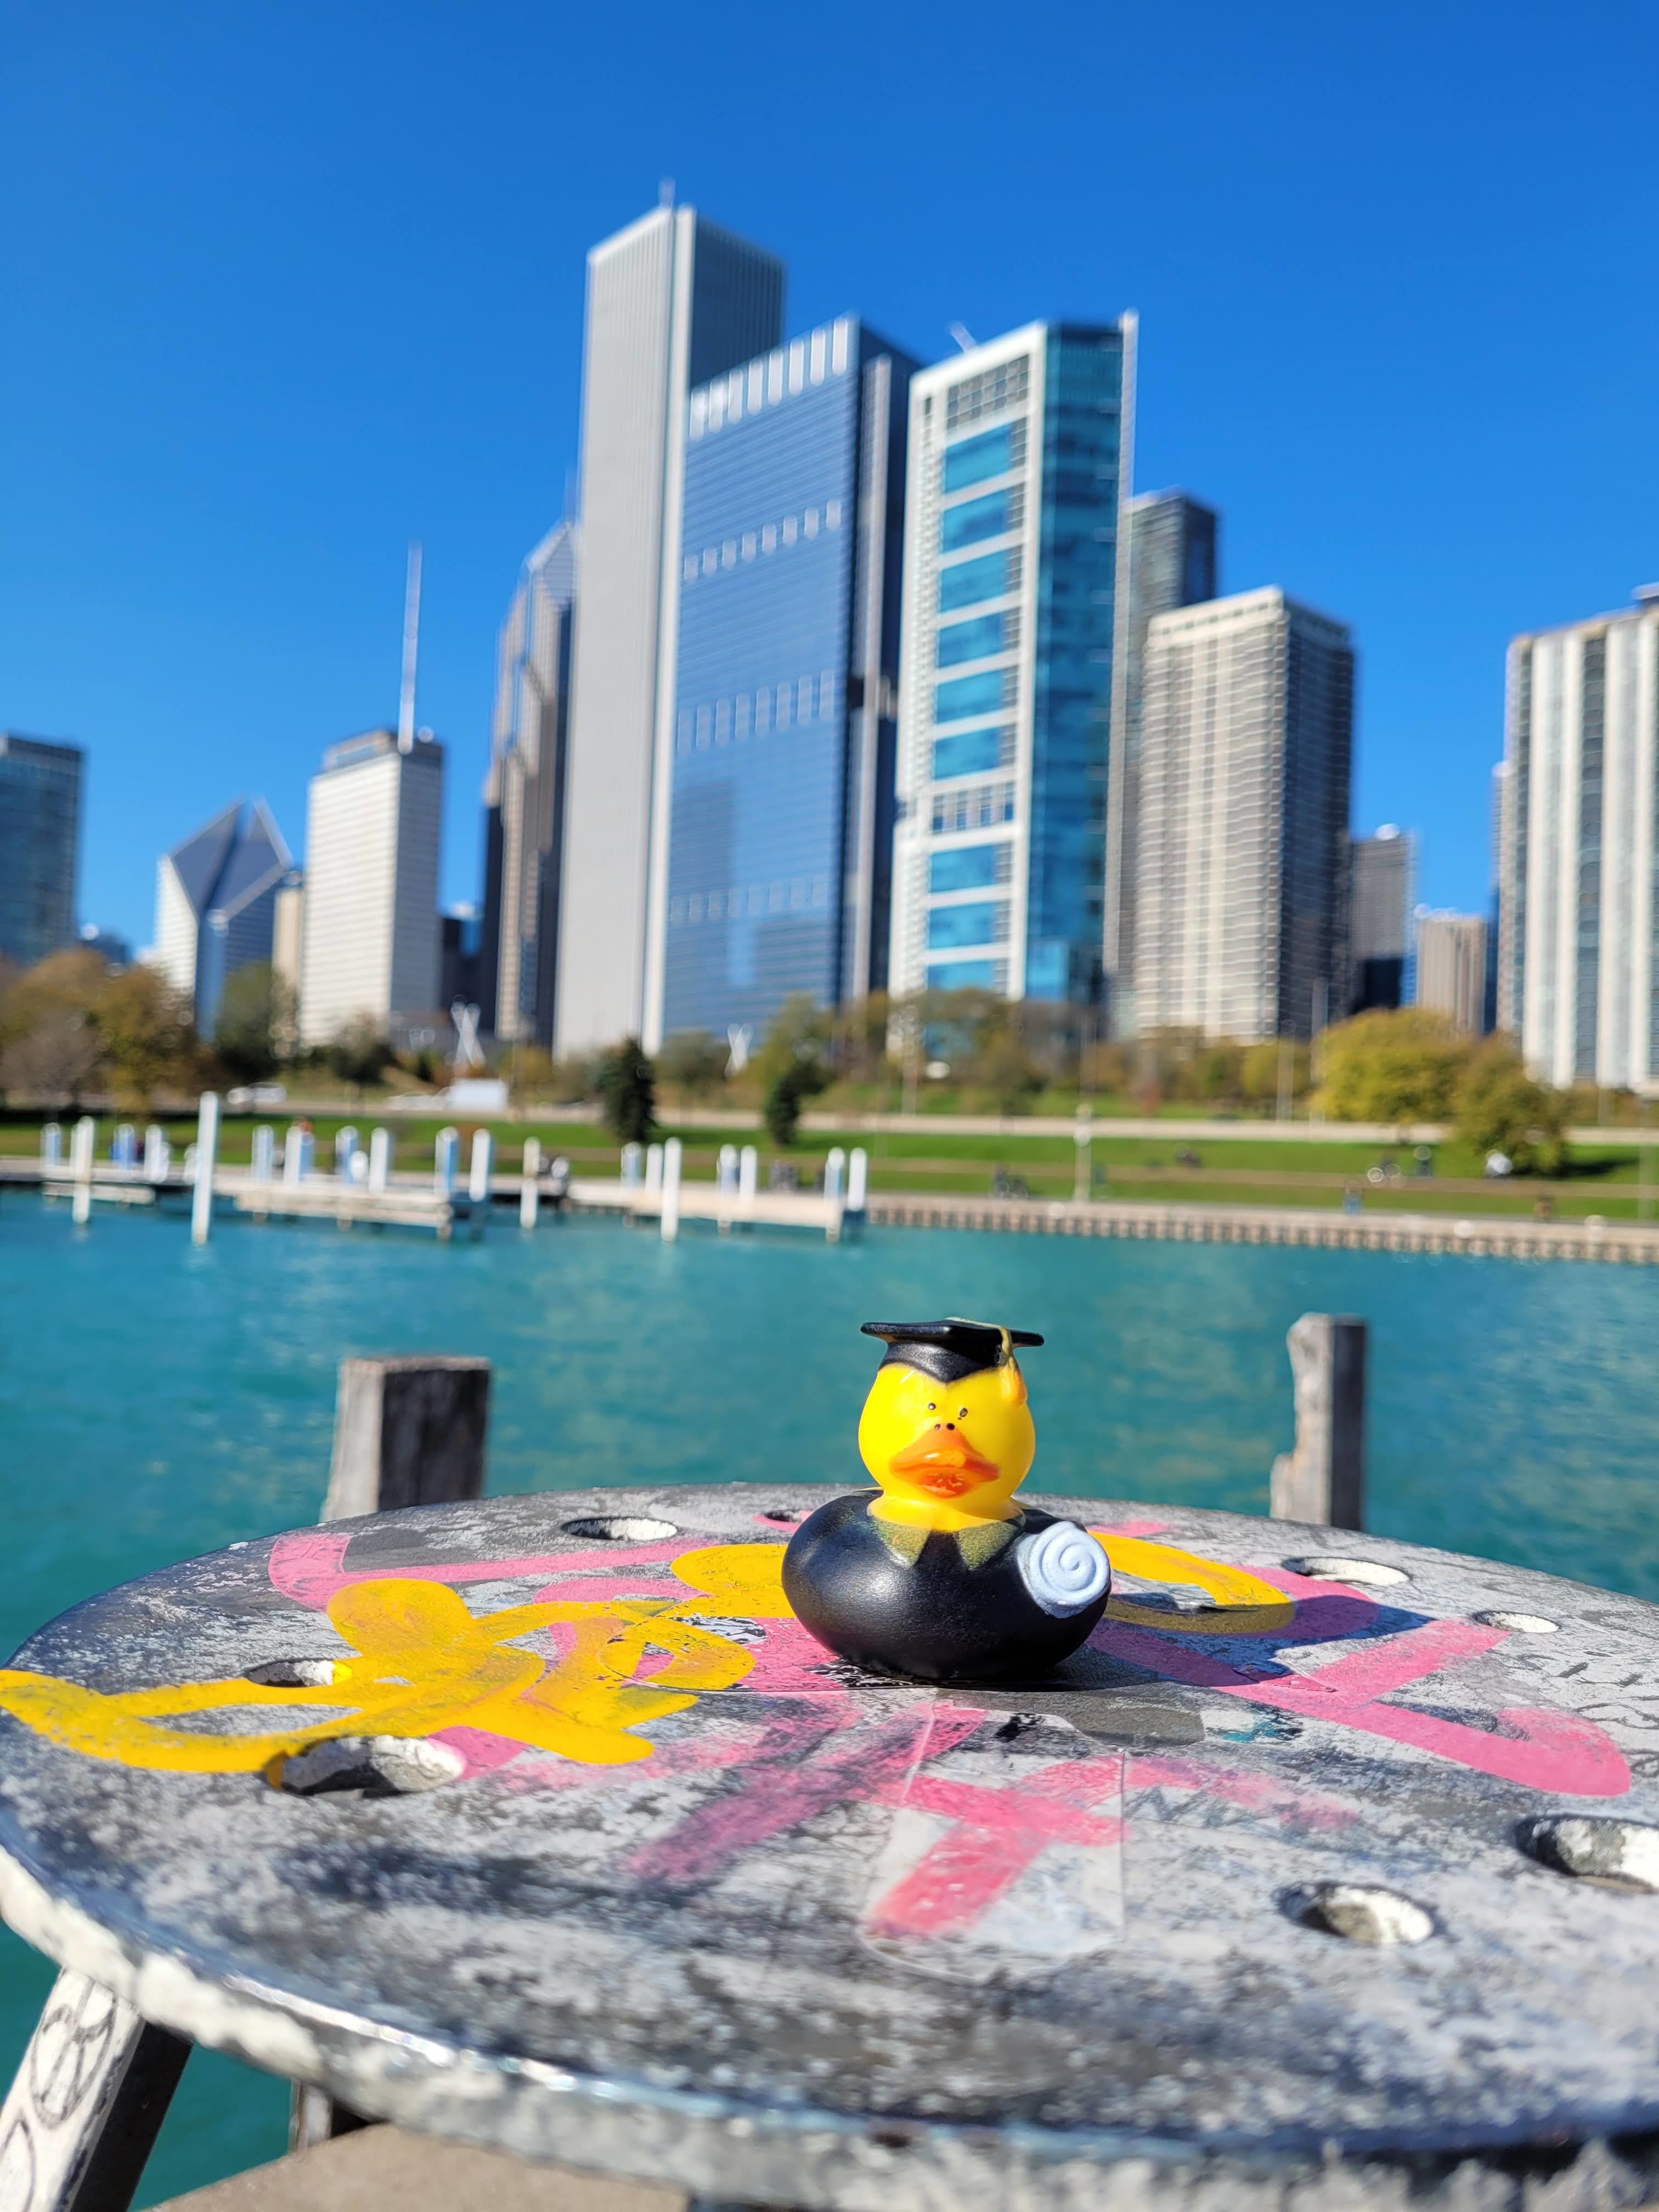 Study duck in scholarly garb with water and skyline in background